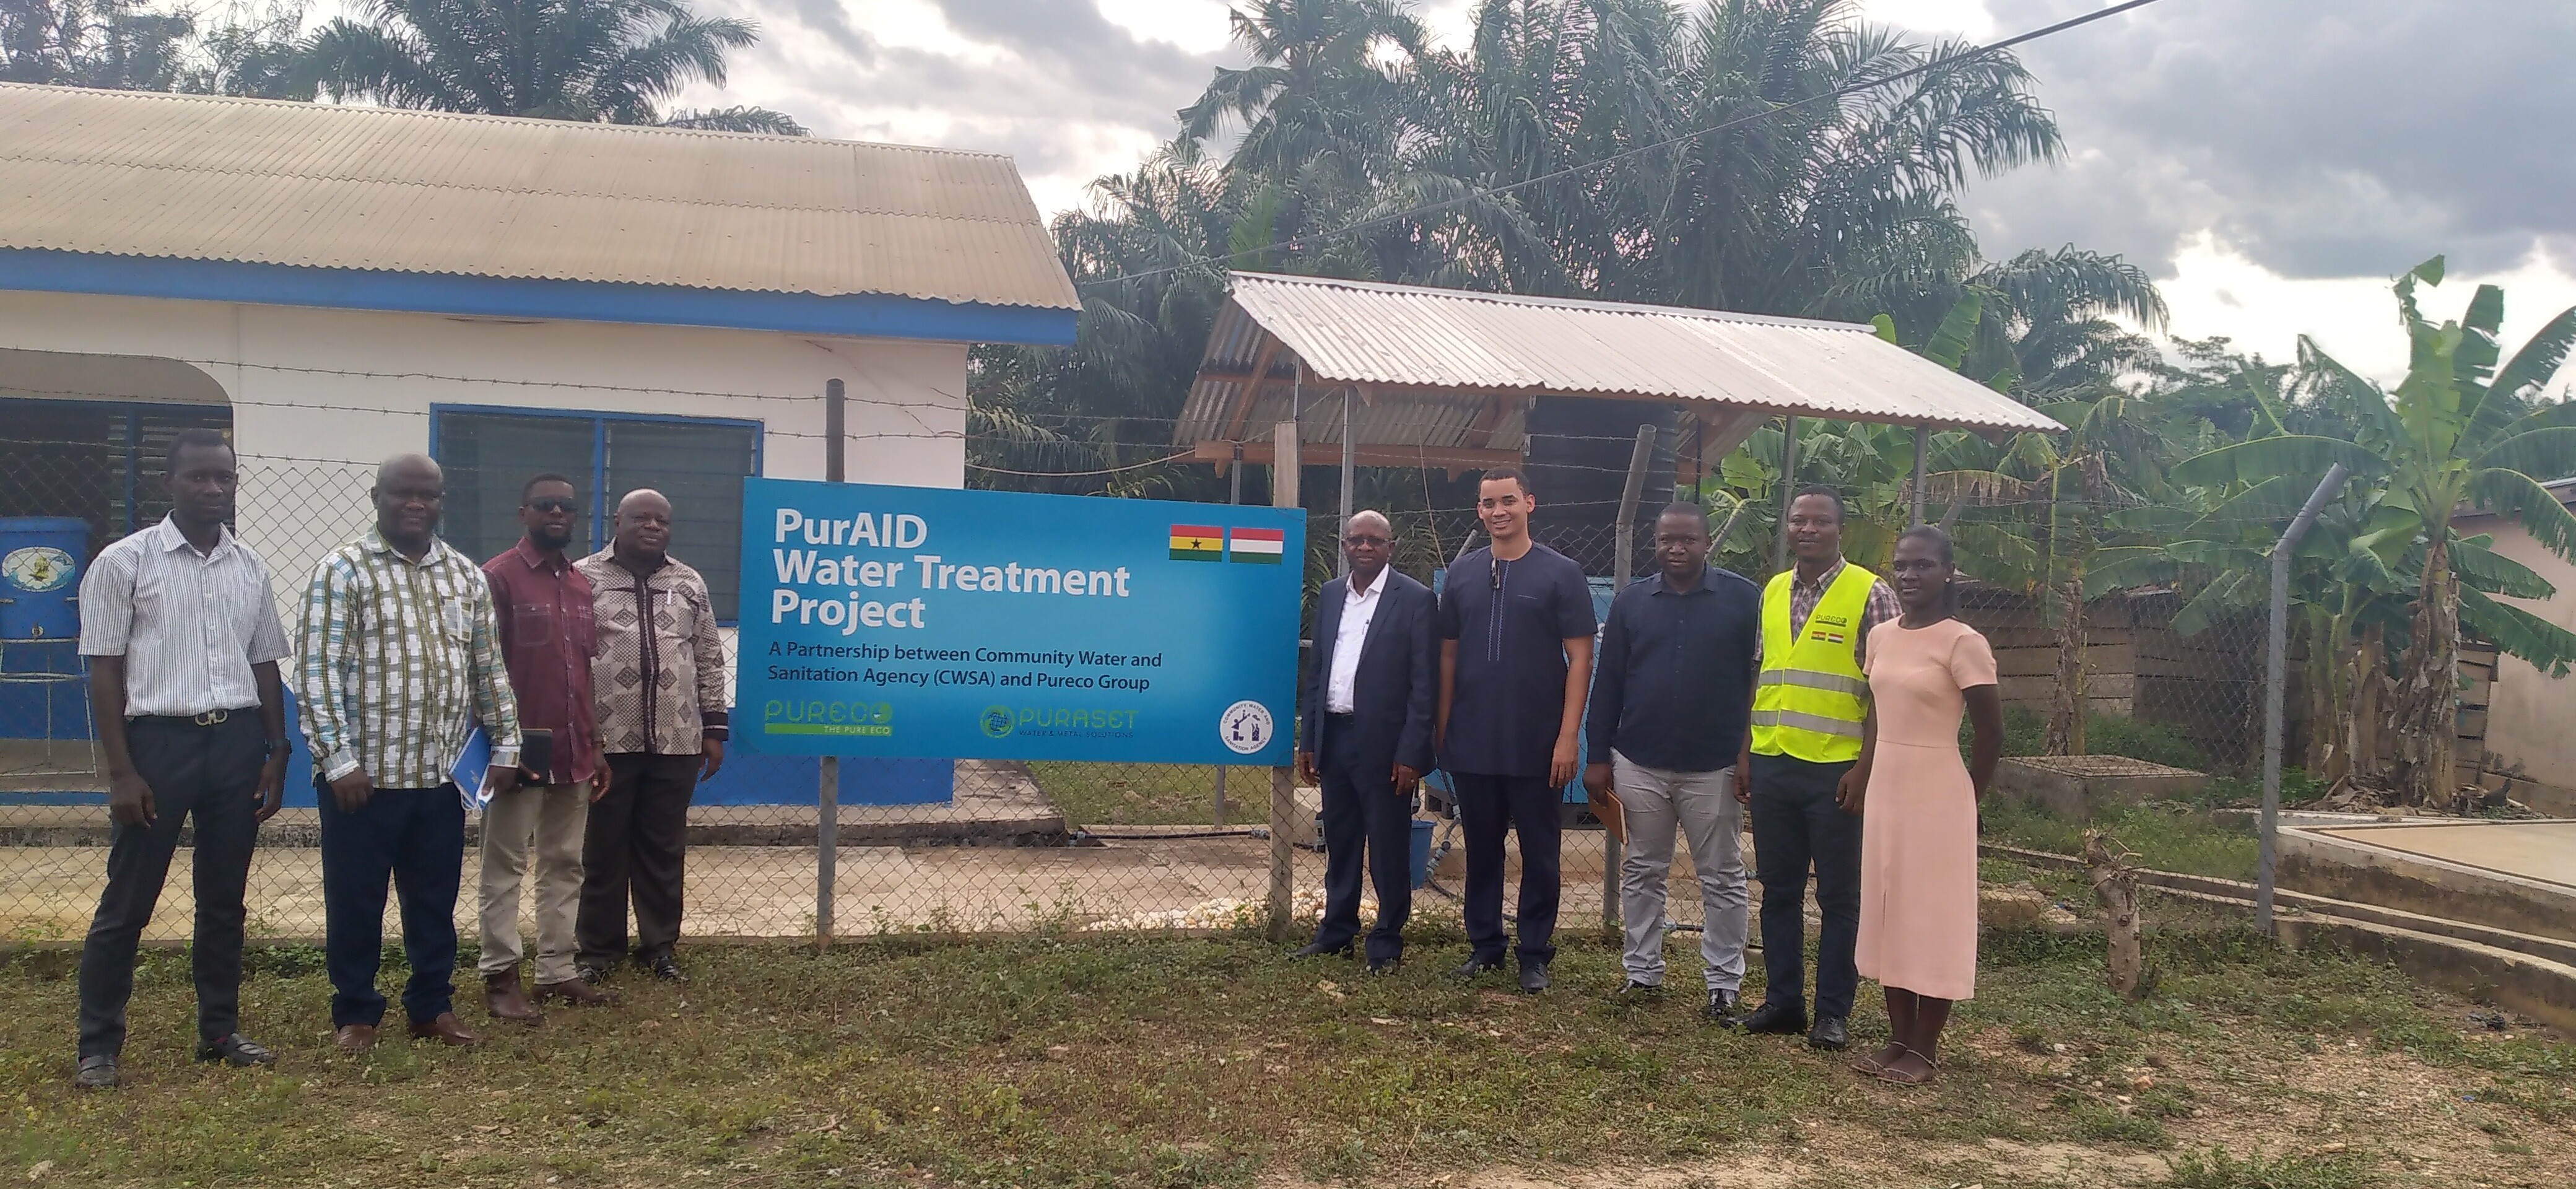 The minister of Sierra Leone visited our PurAID project in Ghana